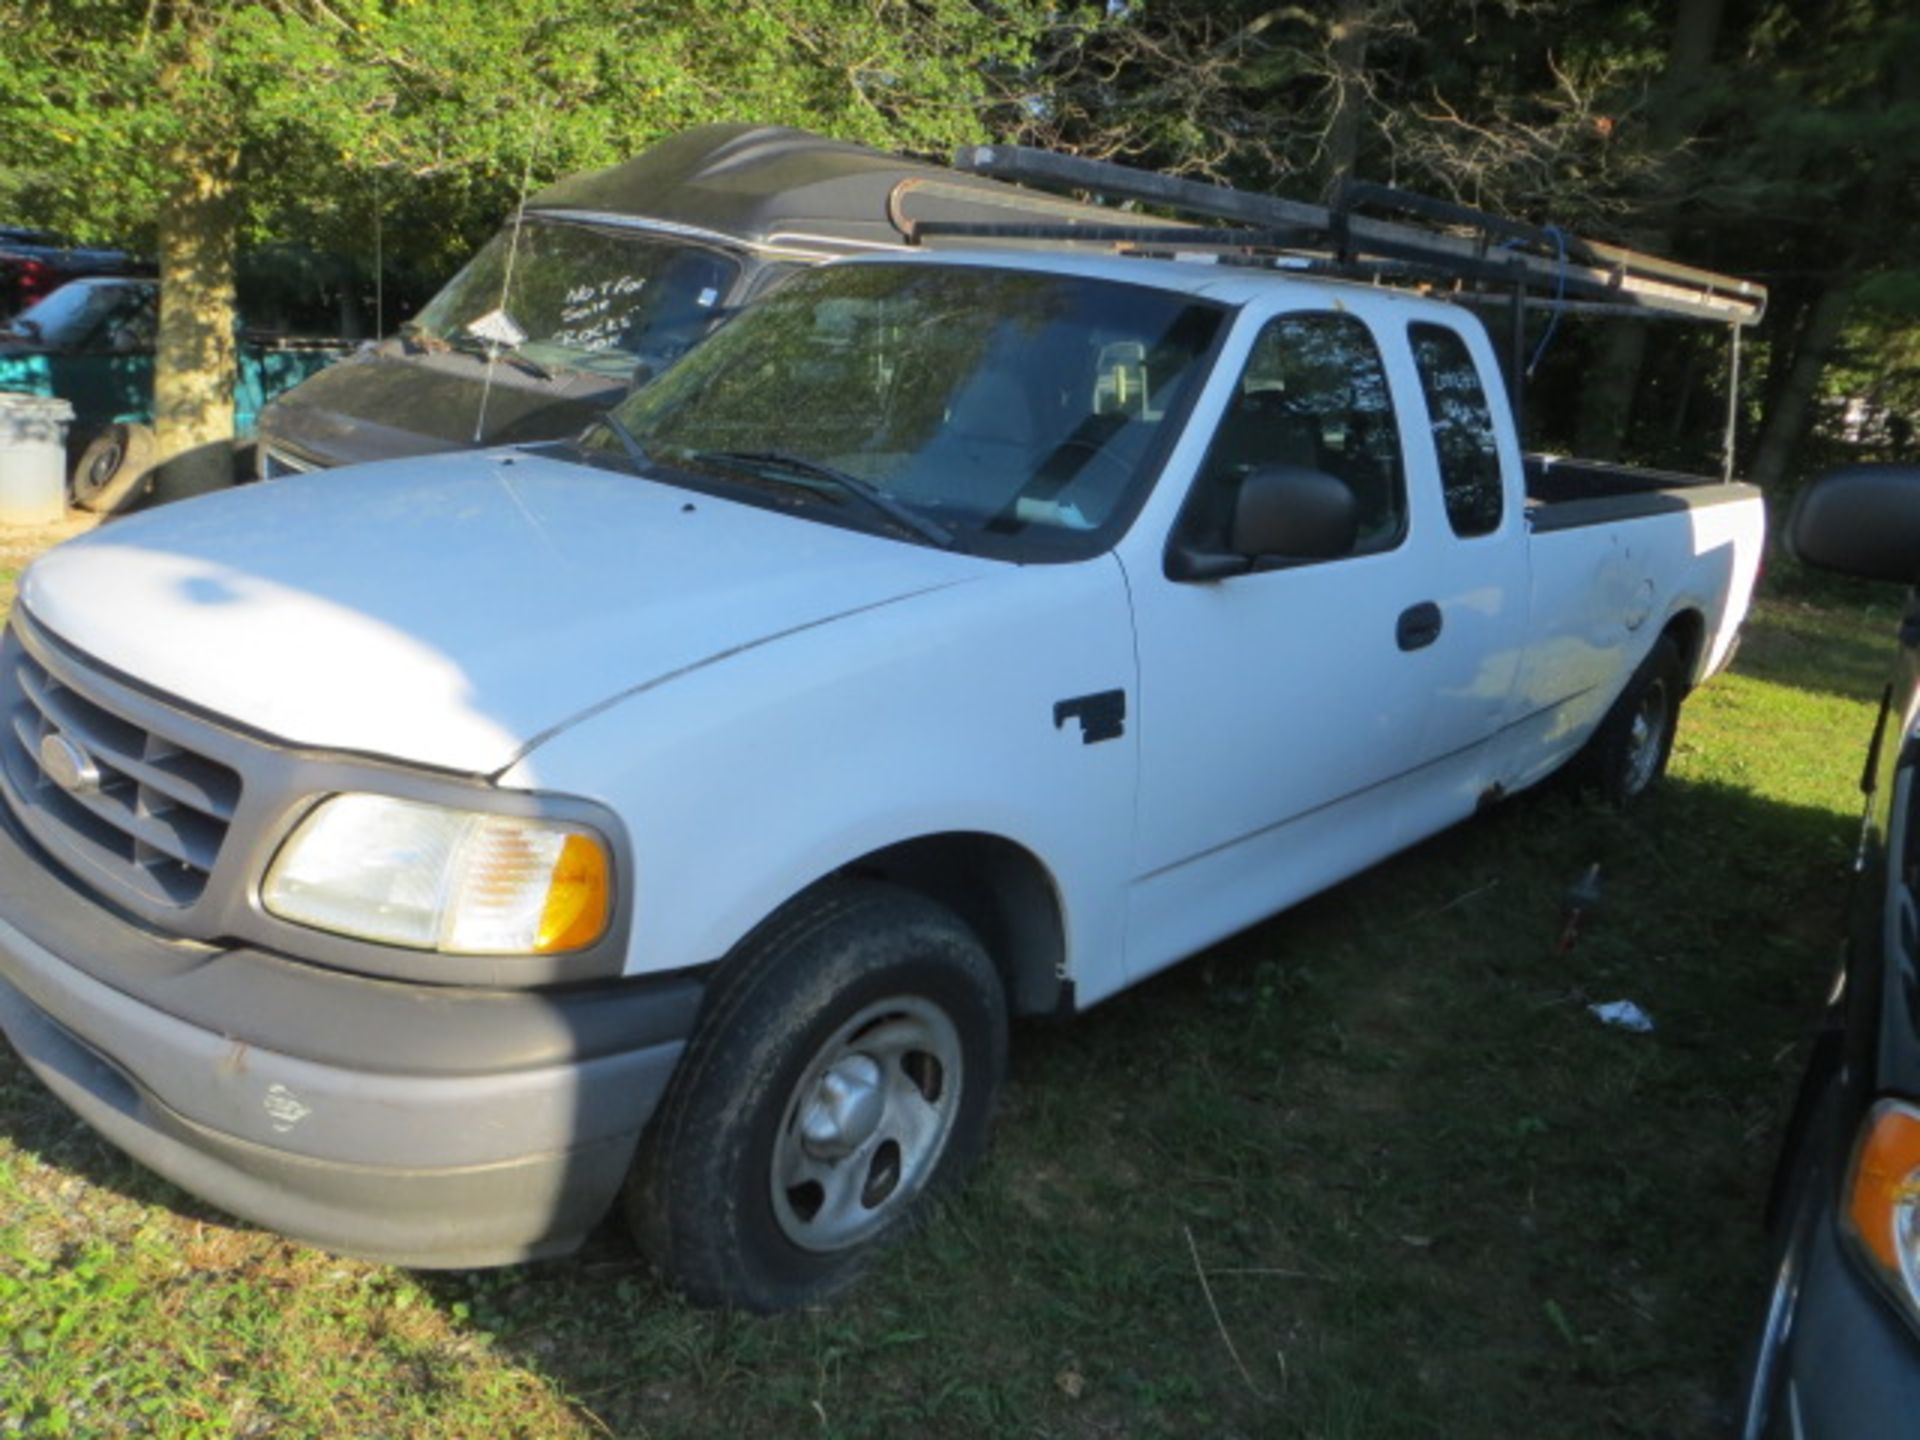 2003 Ford F-150 XL-EXTENDED CAB-BODY DAMAGE 116000 MILES,VIN 1FTRX17W53NA84231, SOLD WITH GOOD TRANS - Image 4 of 4